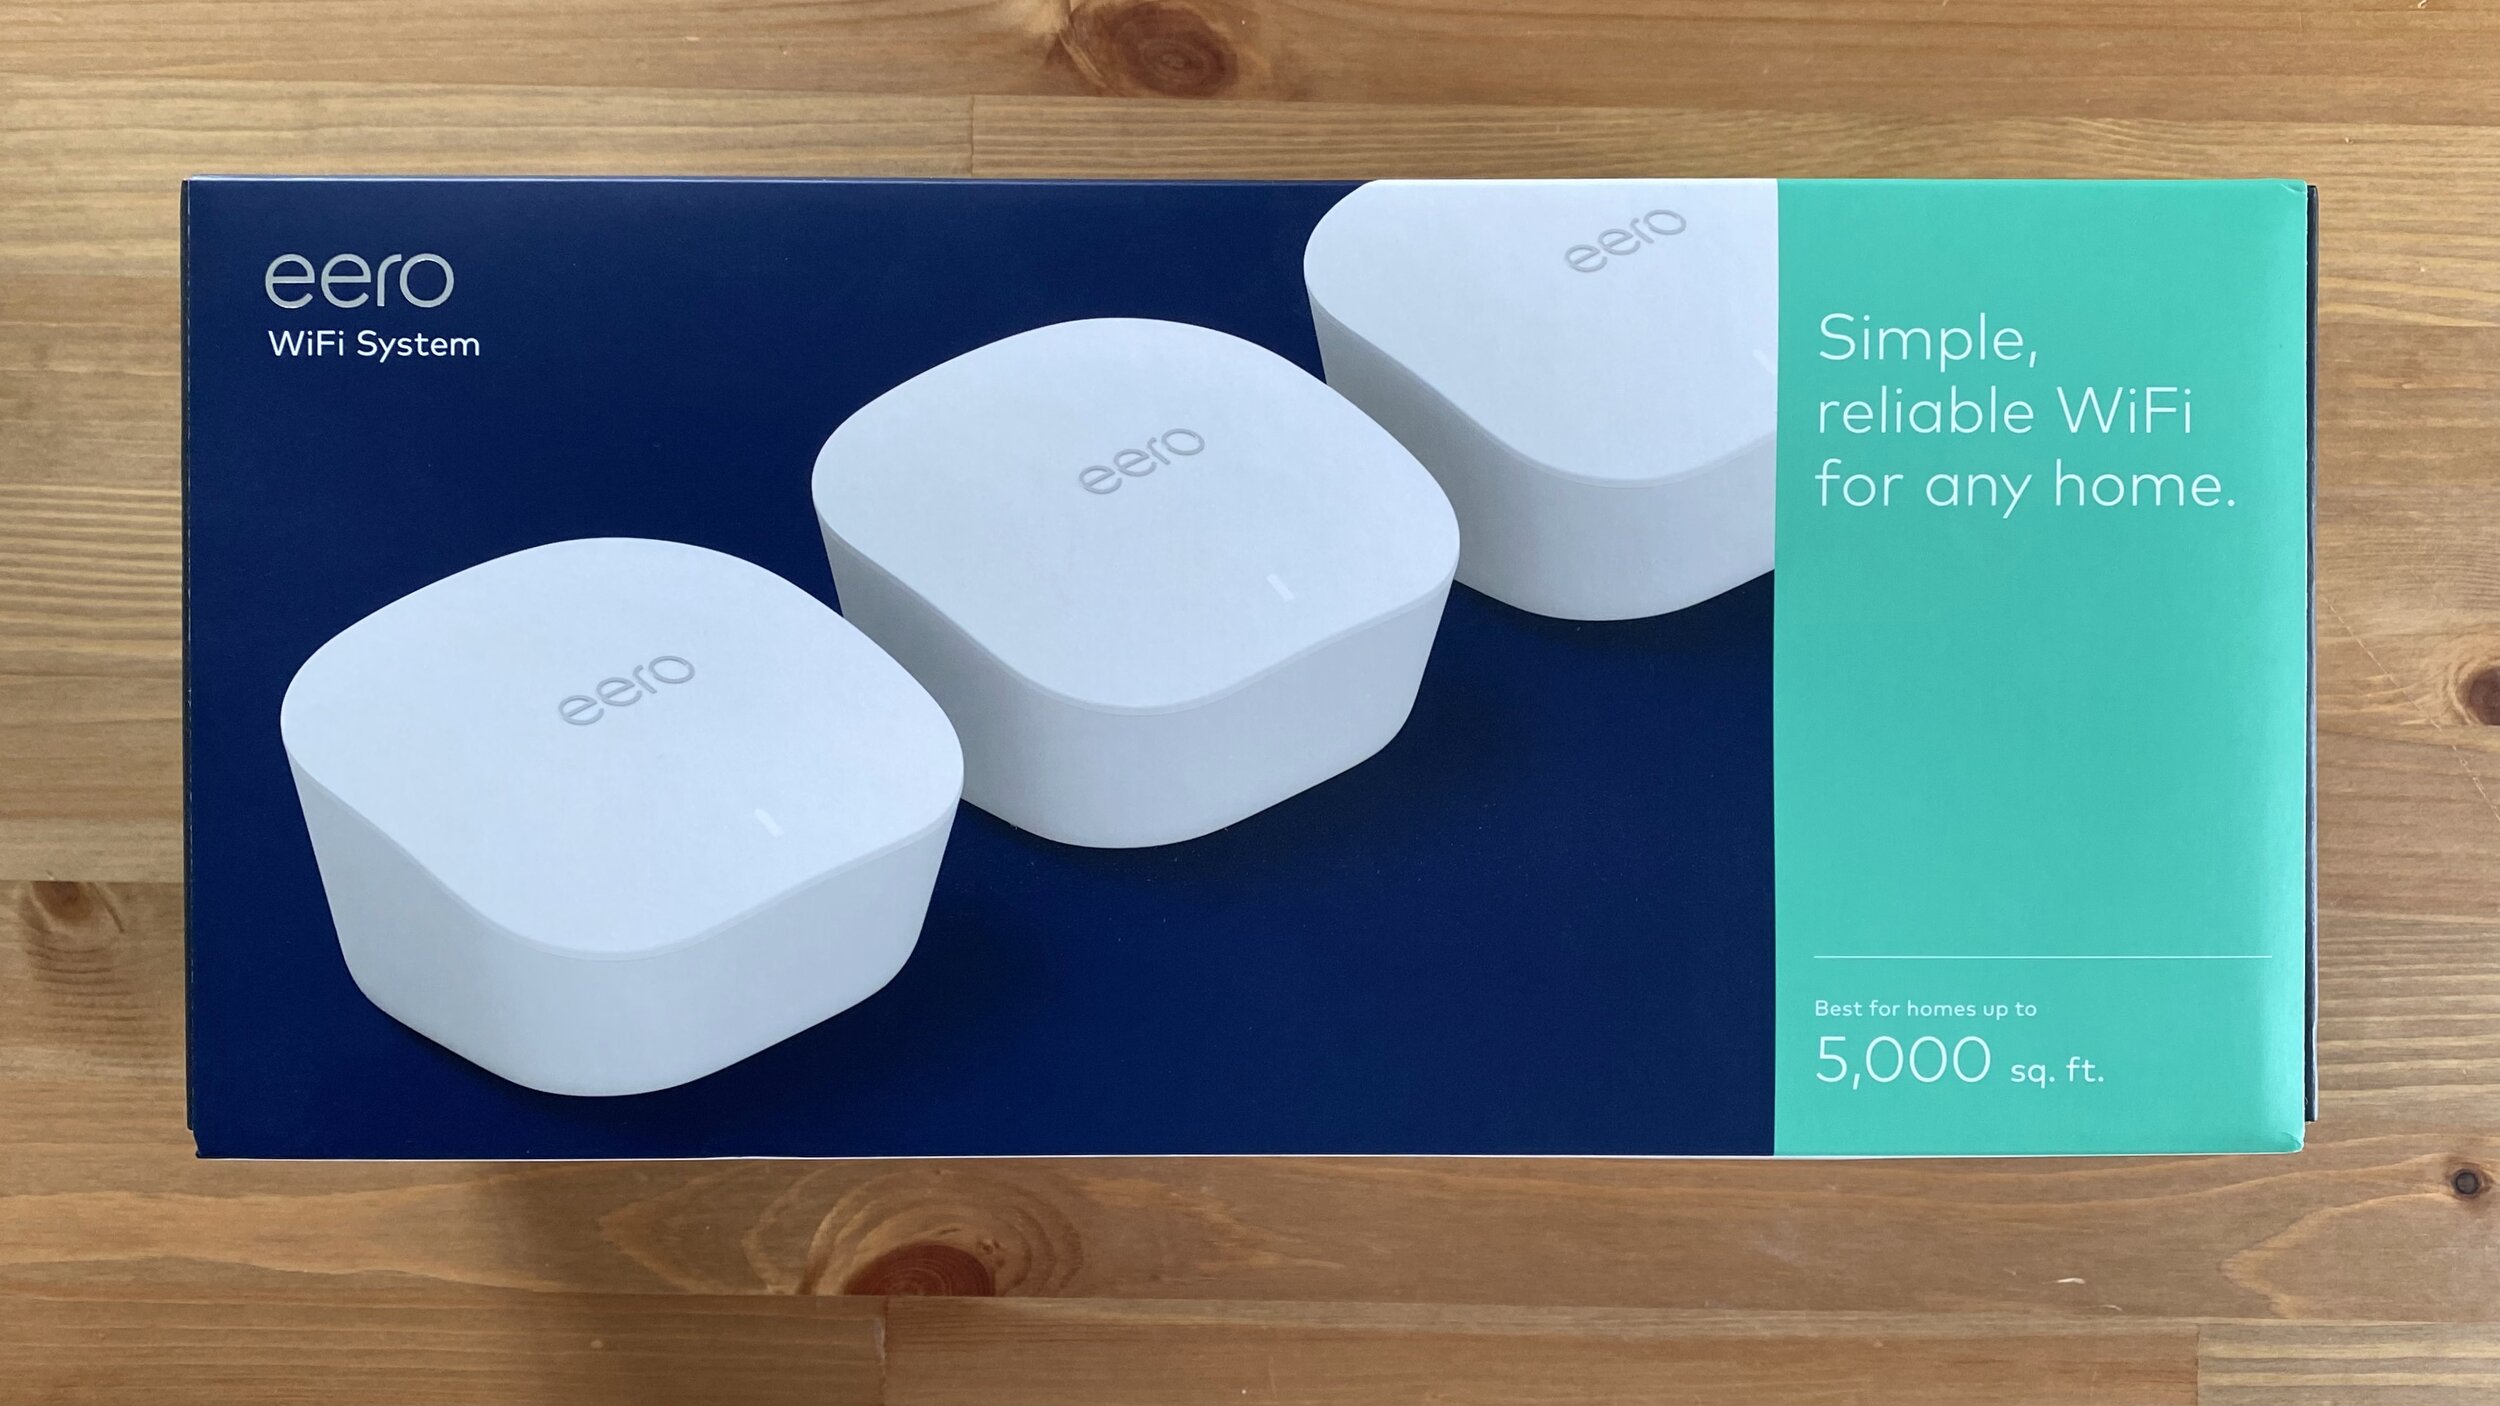 This is the basic 3-piece Eero Kit